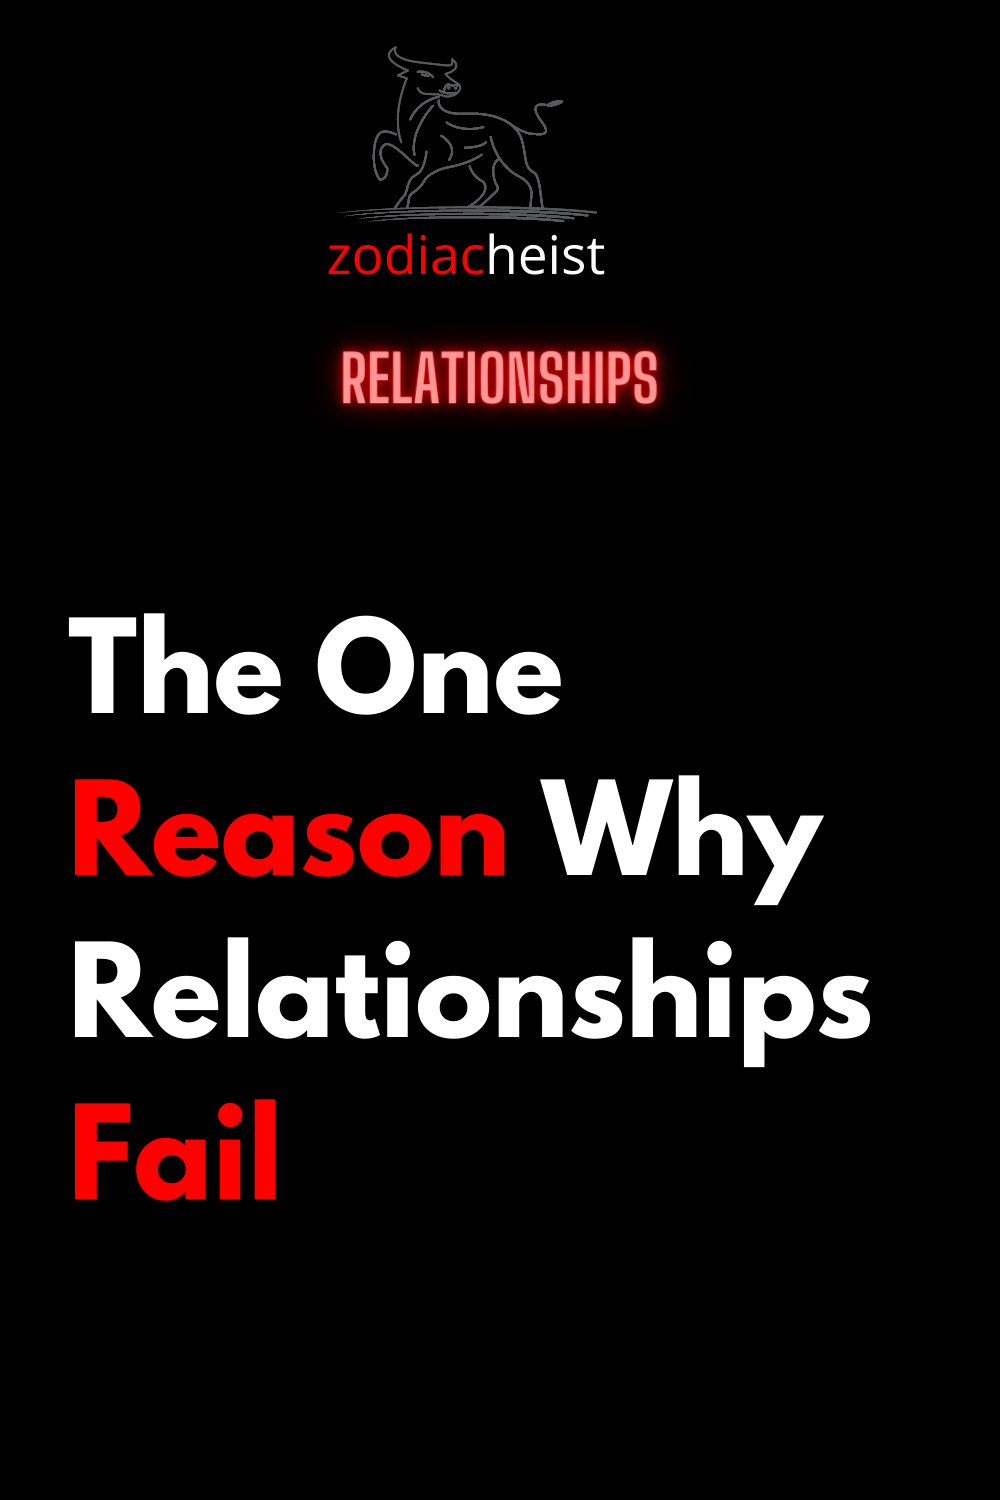 The One Reason Why Relationships Fail